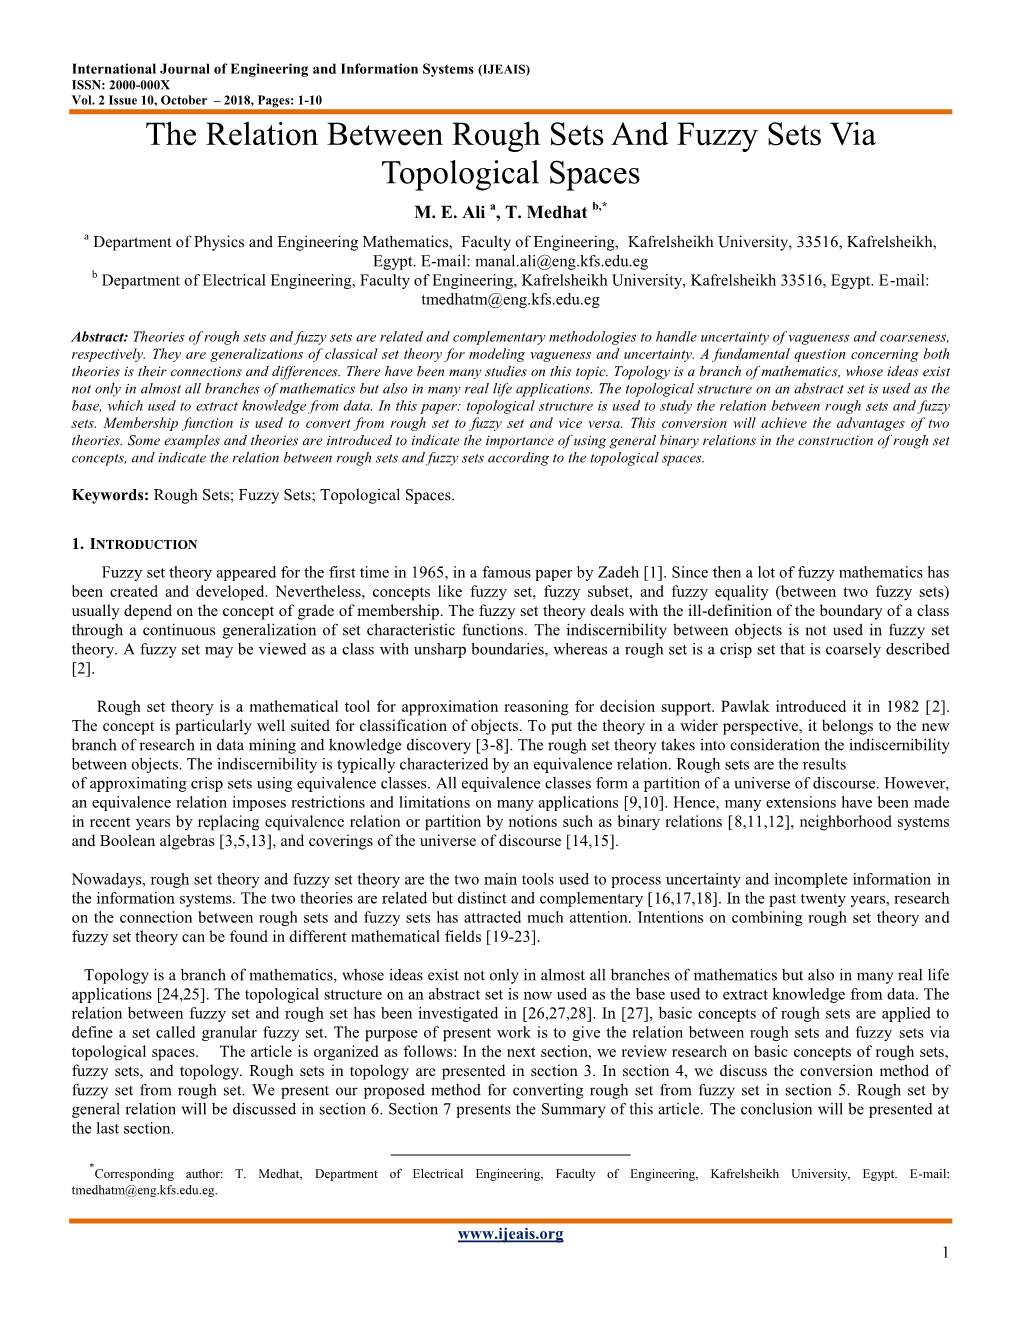 The Relation Between Rough Sets and Fuzzy Sets Via Topological Spaces M